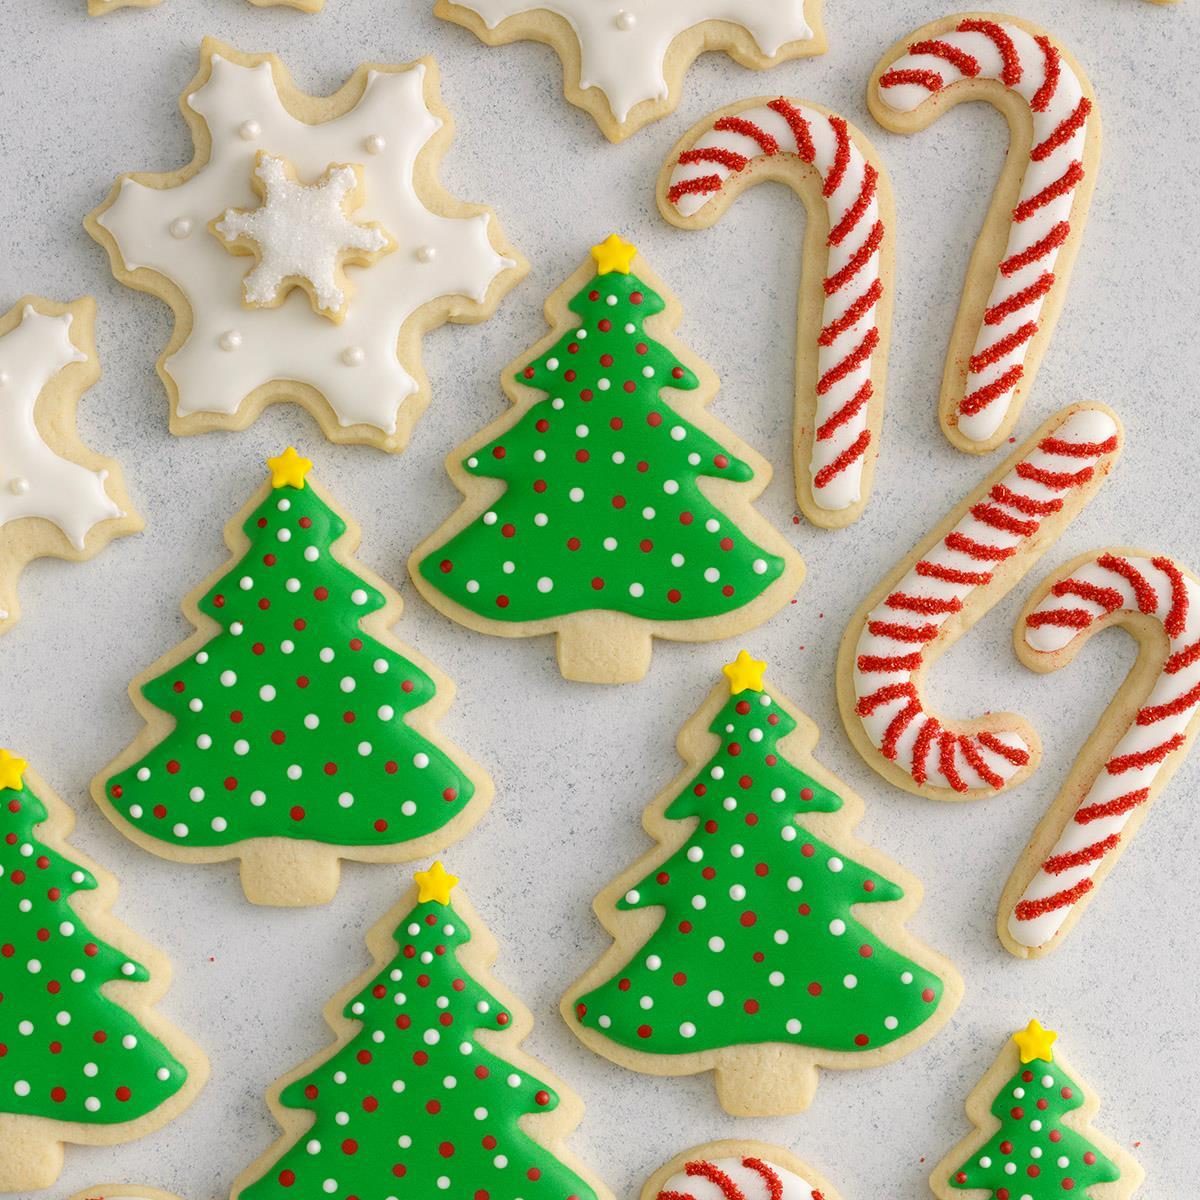 Decorated Christmas Cutout Cookies Recipe: How to Make It